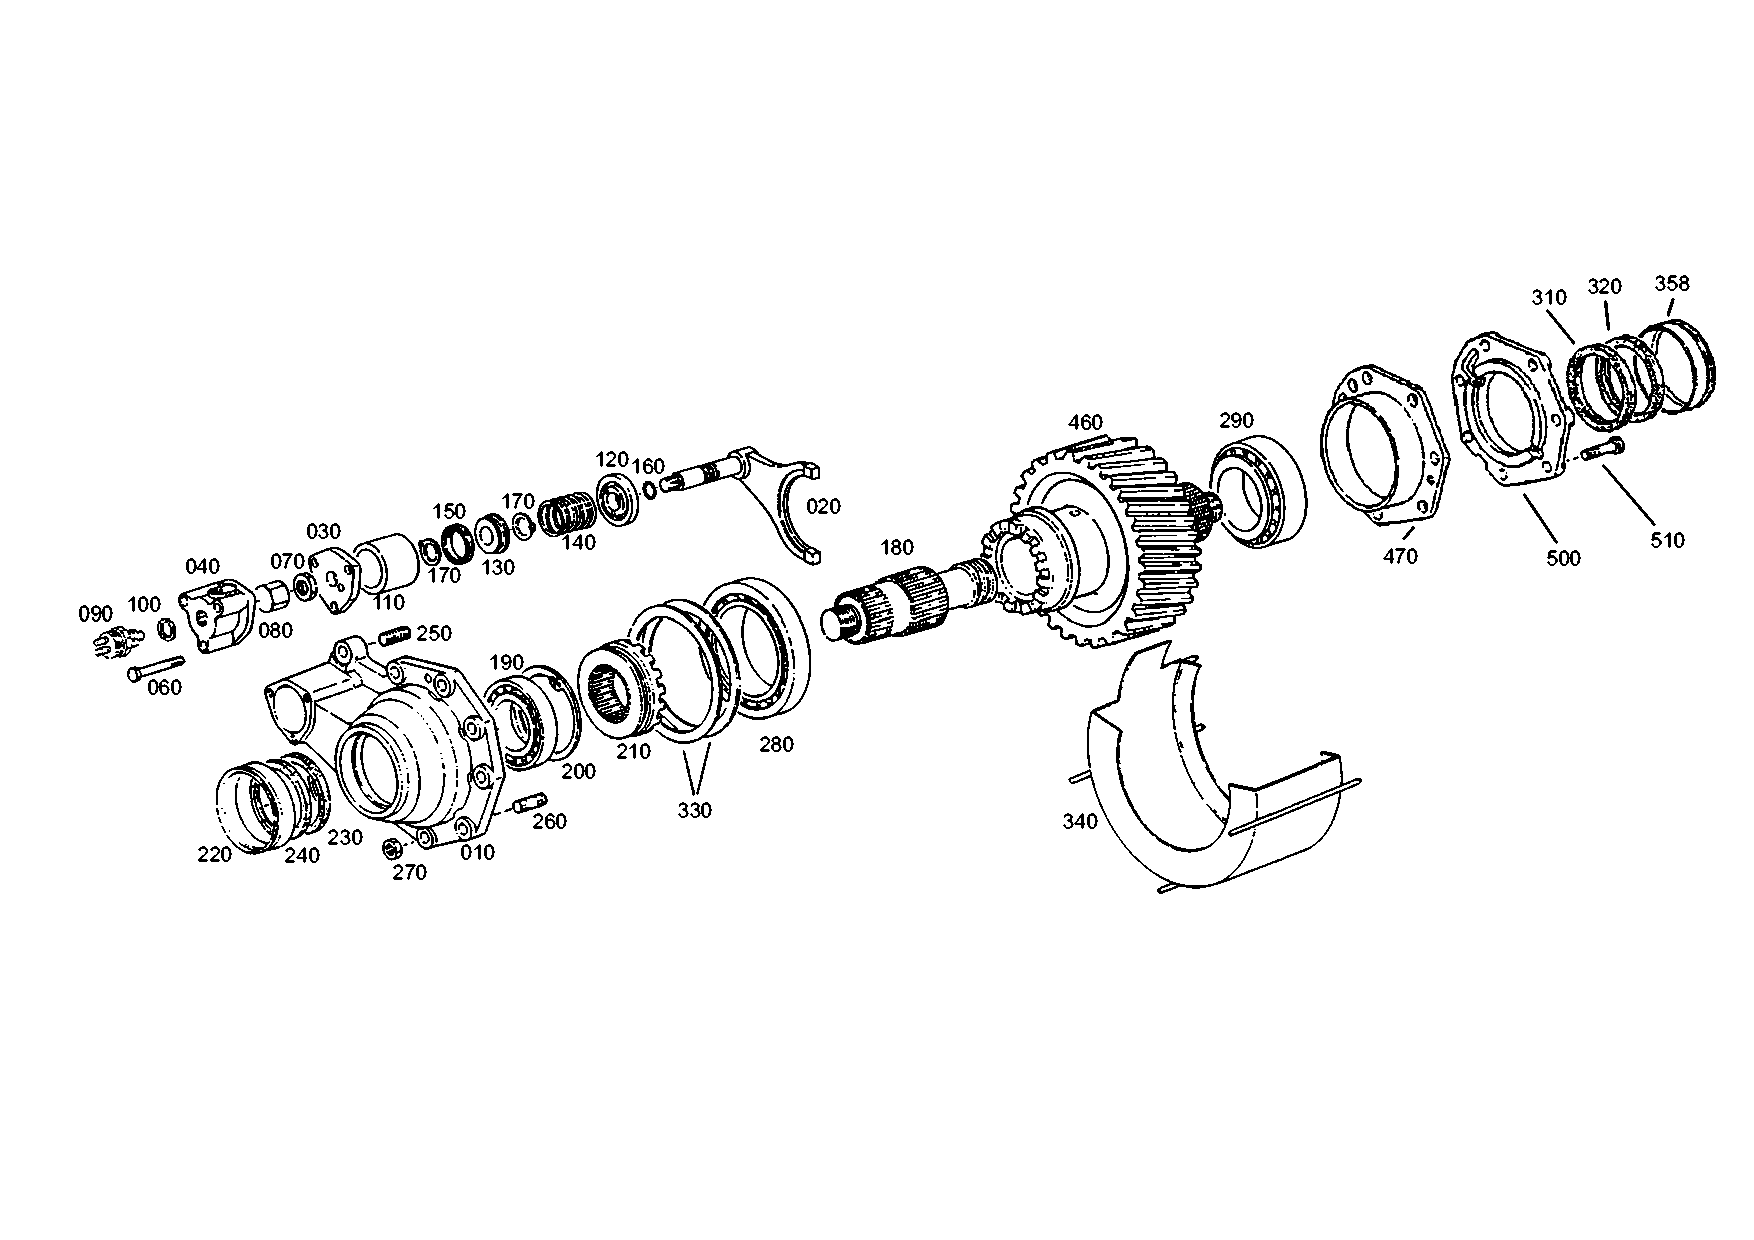 drawing for LUNA EQUIPOS INDUSTRIEALES, S.A. 199118250222 - BEARING HOUSING (figure 4)